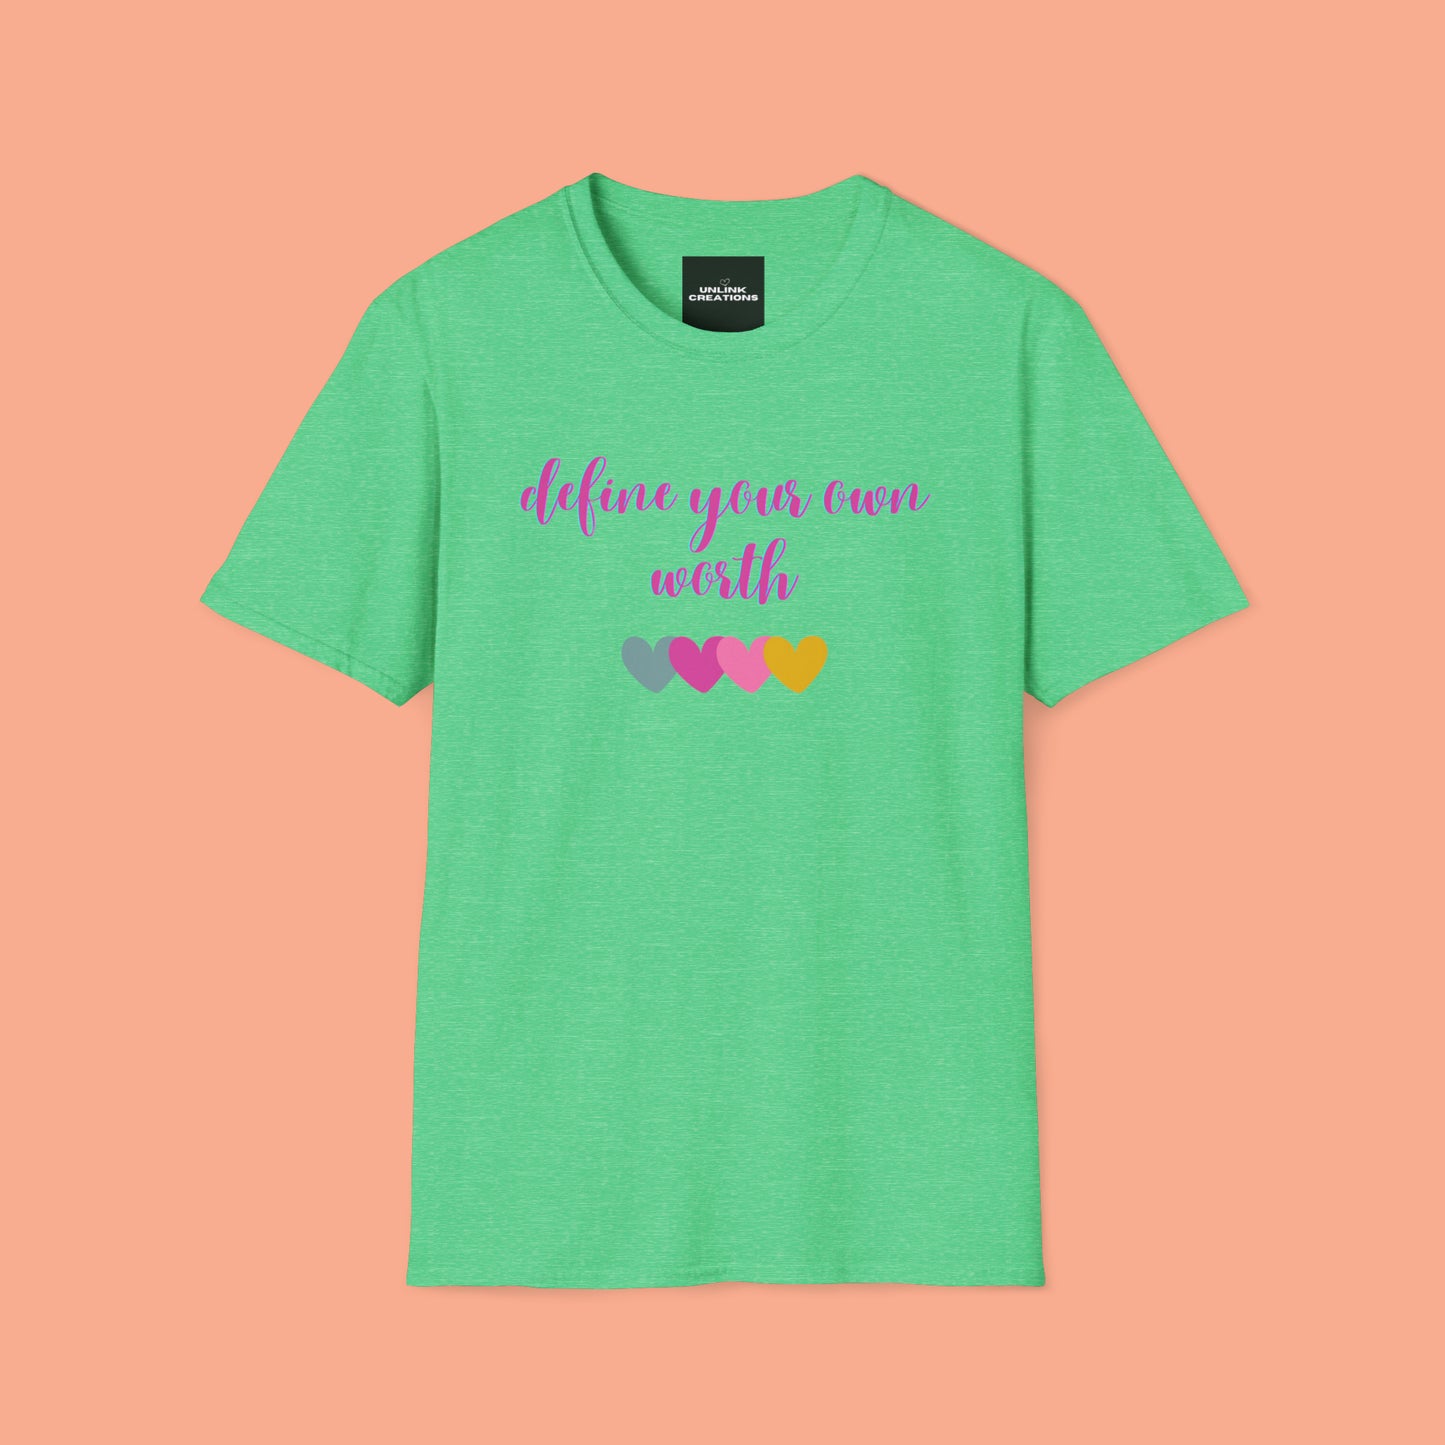 Motivational message to “define your own worth” instead of letting others do it for you on this Unisex Softstyle T-Shirt.